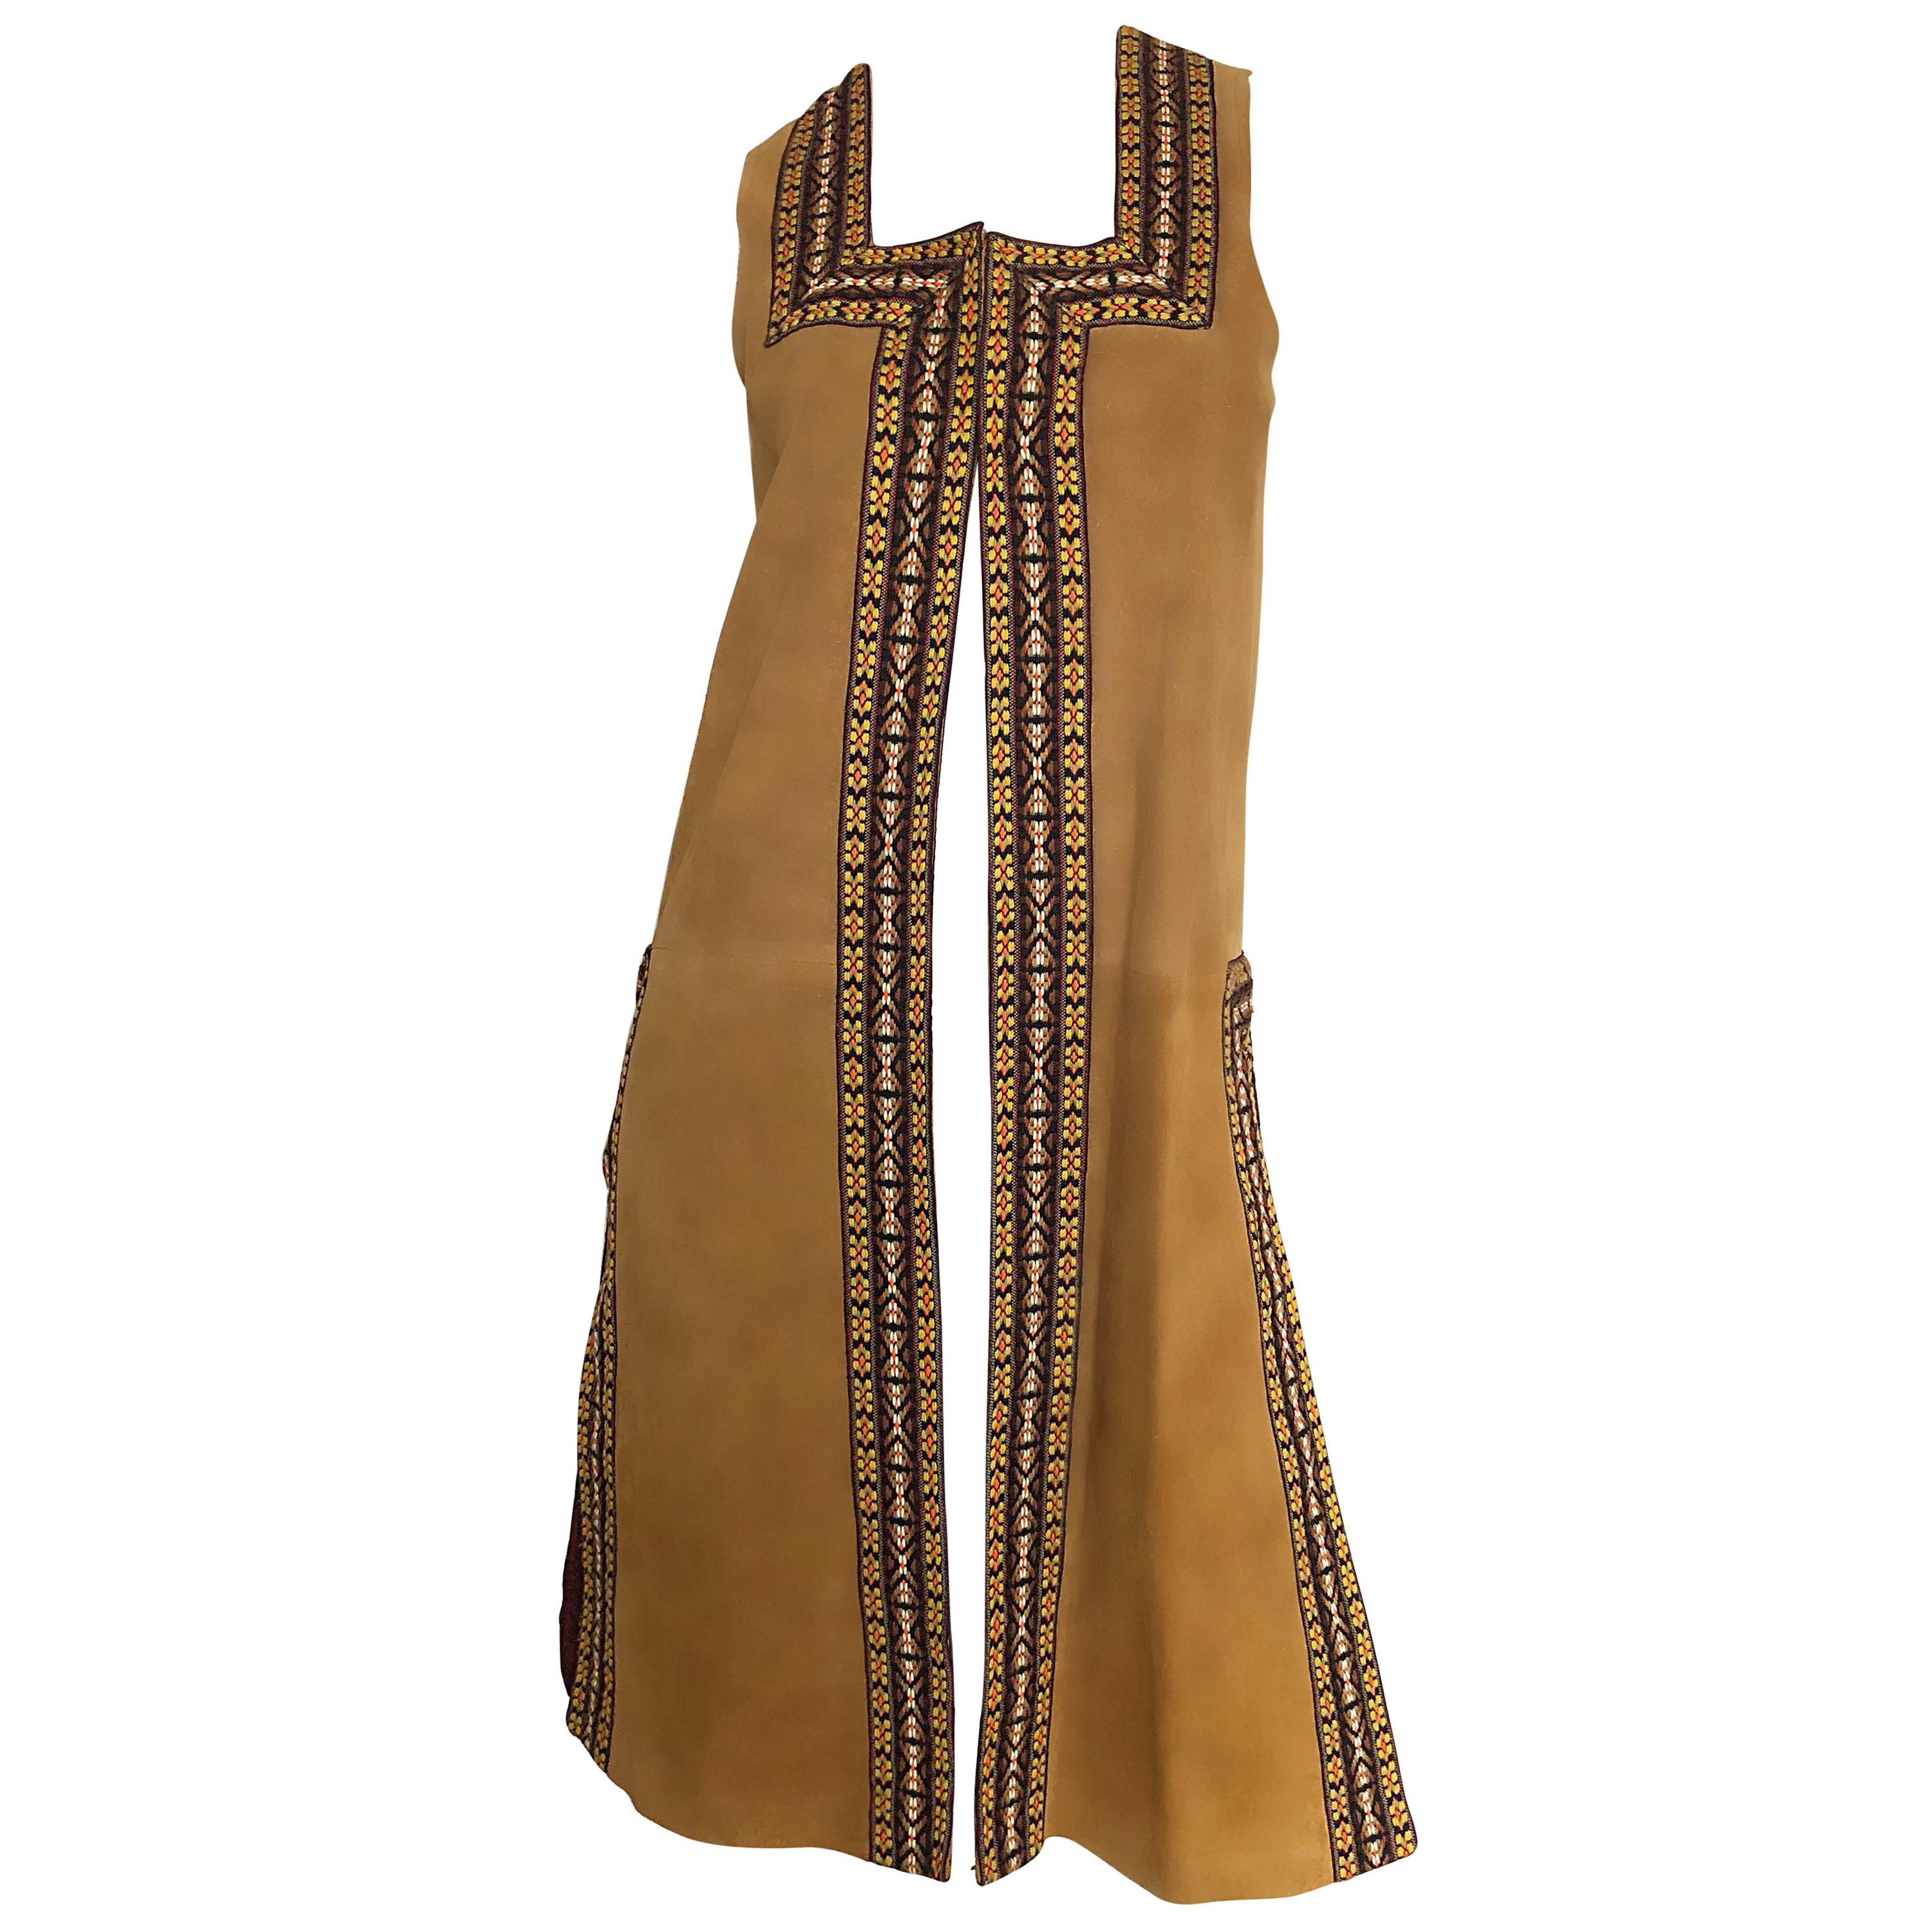 Chic 1970s Tan Suede Leather Embroidered 70s Vintage Boho Sleeveless Vest Jacket For Sale